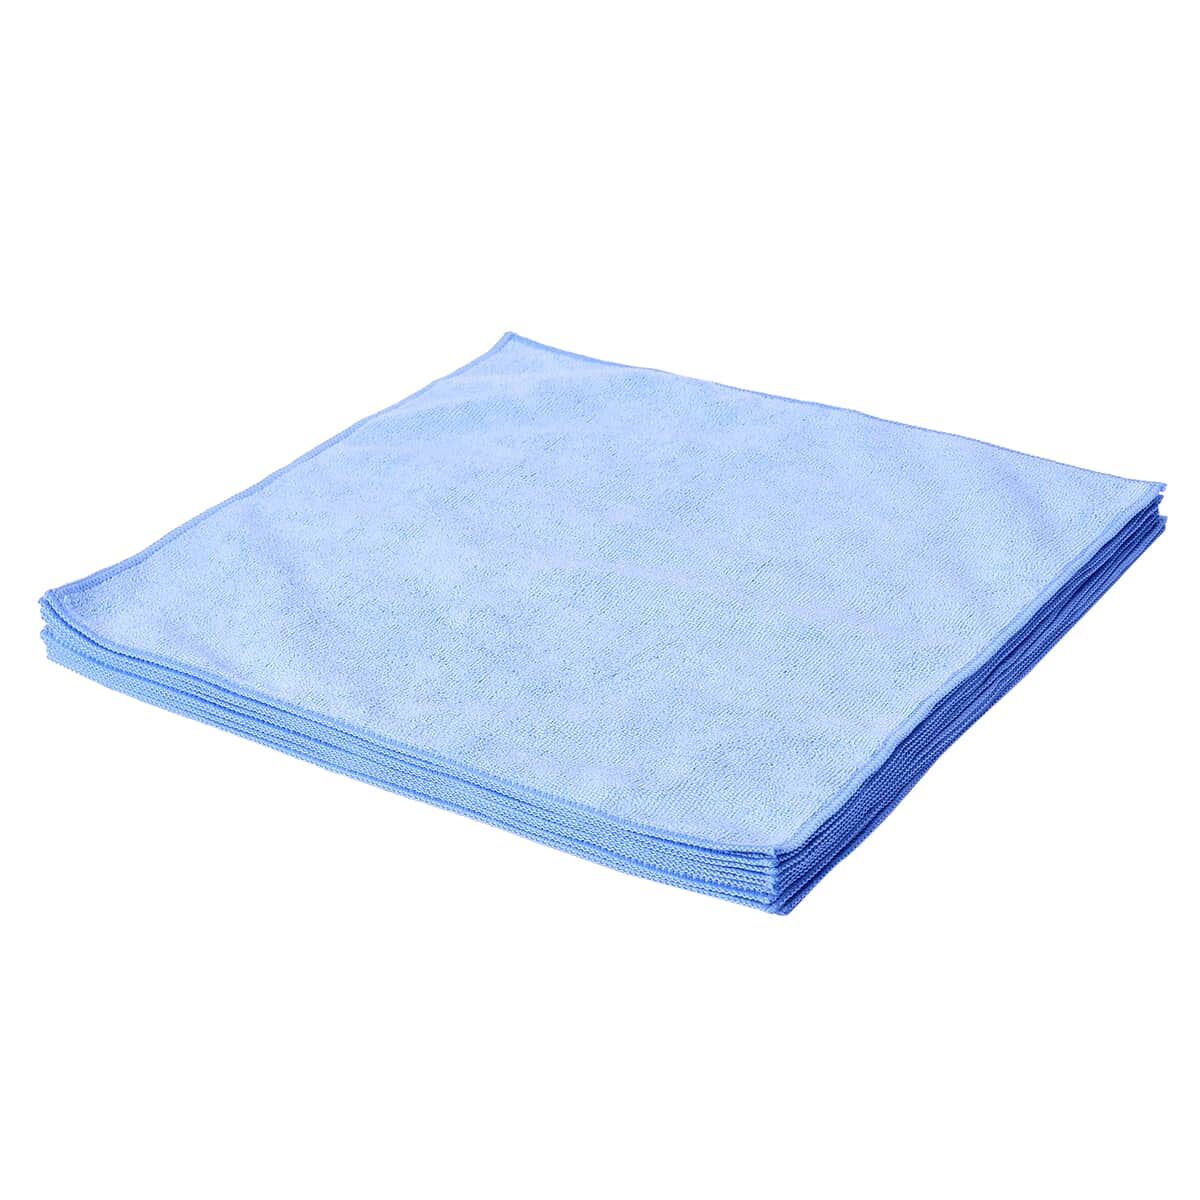 Homesmart Set of 10 Blue 85% Polyester and 15% Polyamide Cleaning Towels image number 0